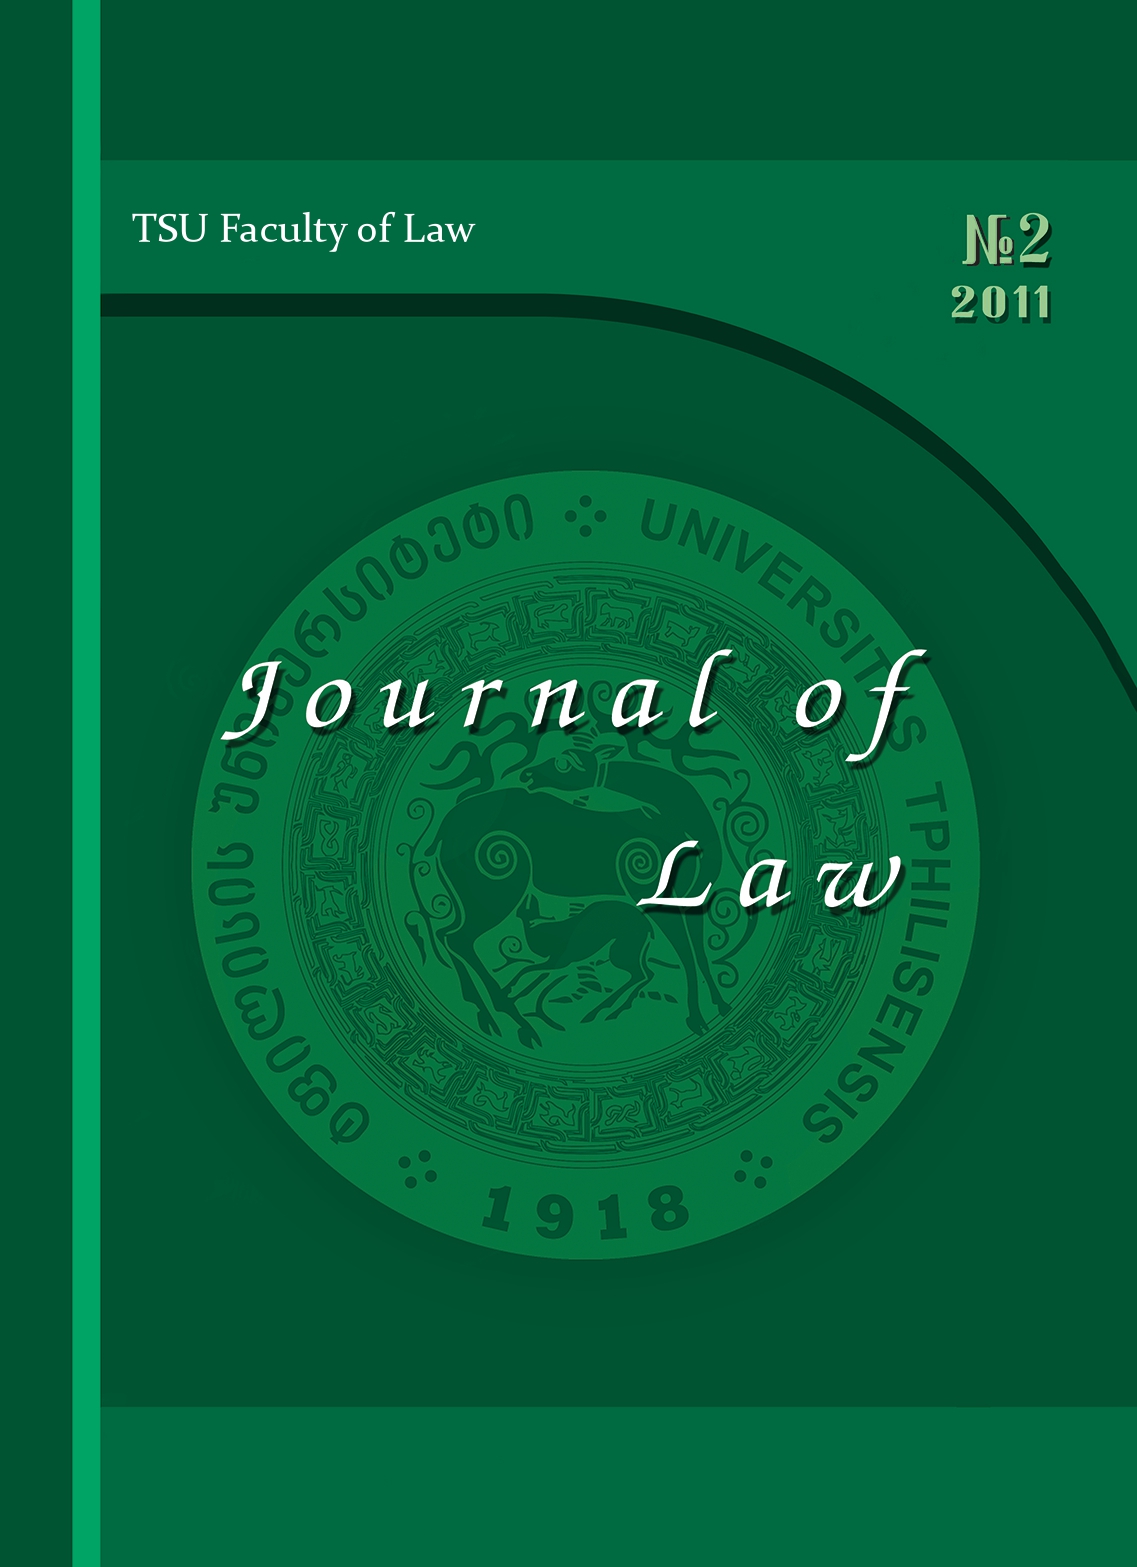 					View No. 2 (2011): Journal of Law
				